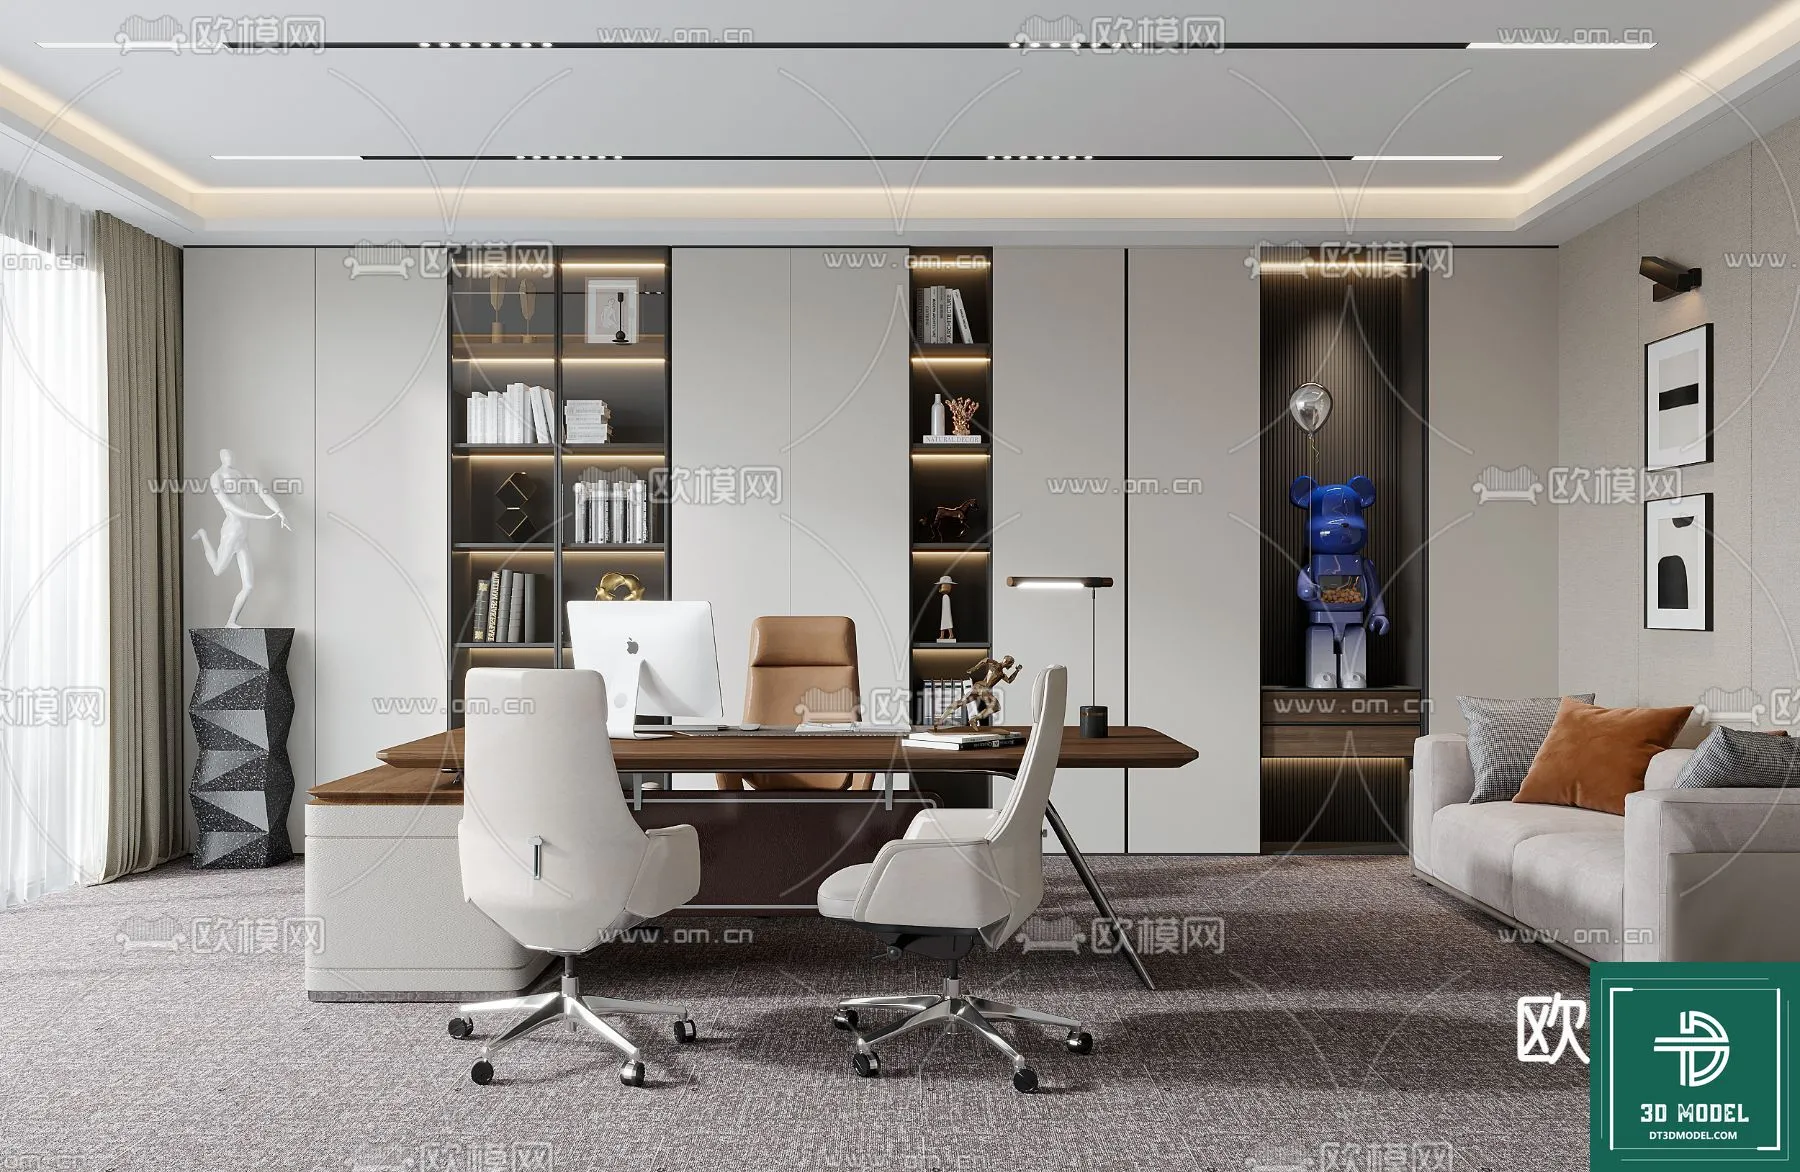 OFFICE ROOM FOR MANAGER – 3DMODEL – 089